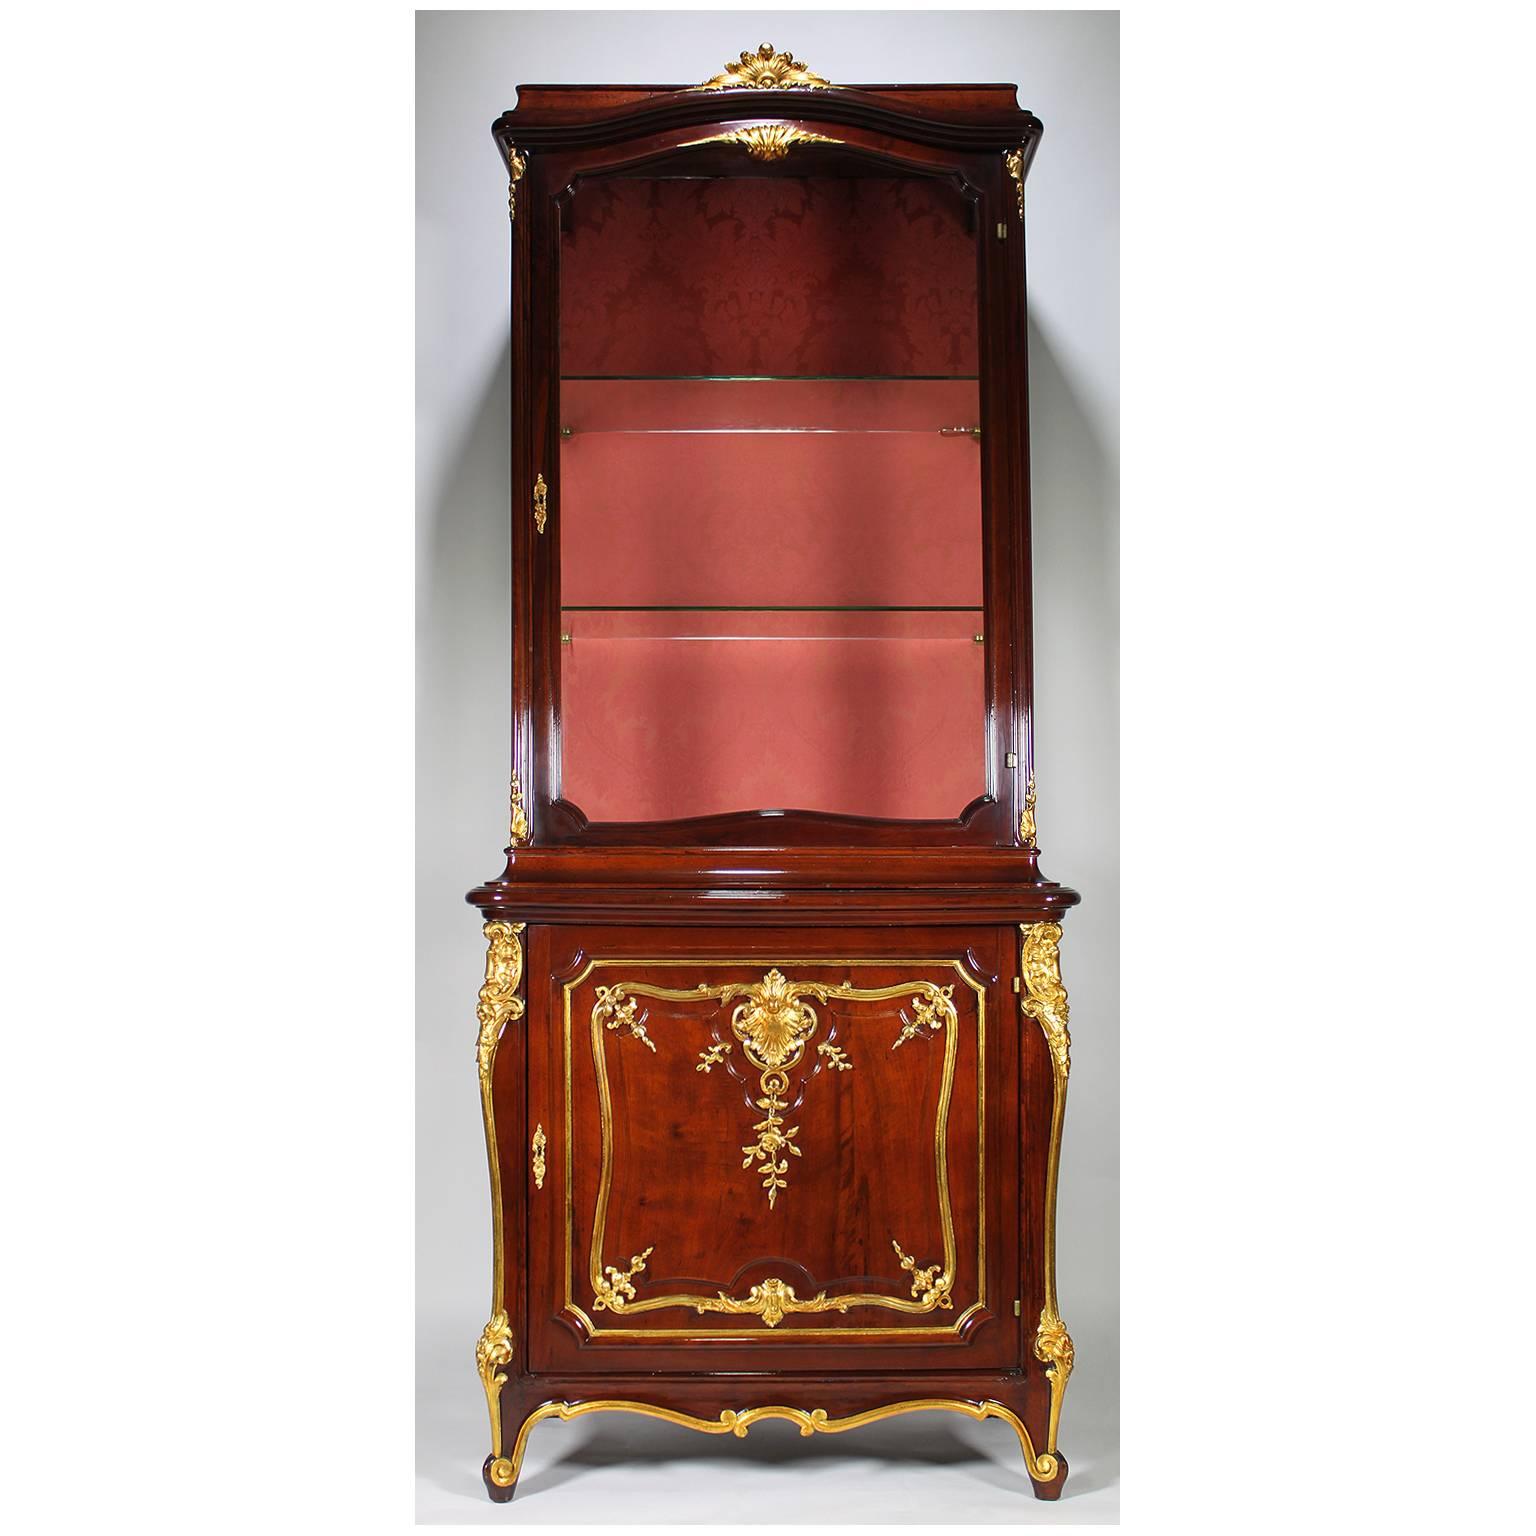 A fine pair of French 19th-20th century Louis XV style mahogany and parcel-gilt-wood carved Vitrines by Mâison de Forest, Paris. Each two-corps cabinet crowned with a carved parcel-giltwood shell above a single door vitrine with two glass shelves.